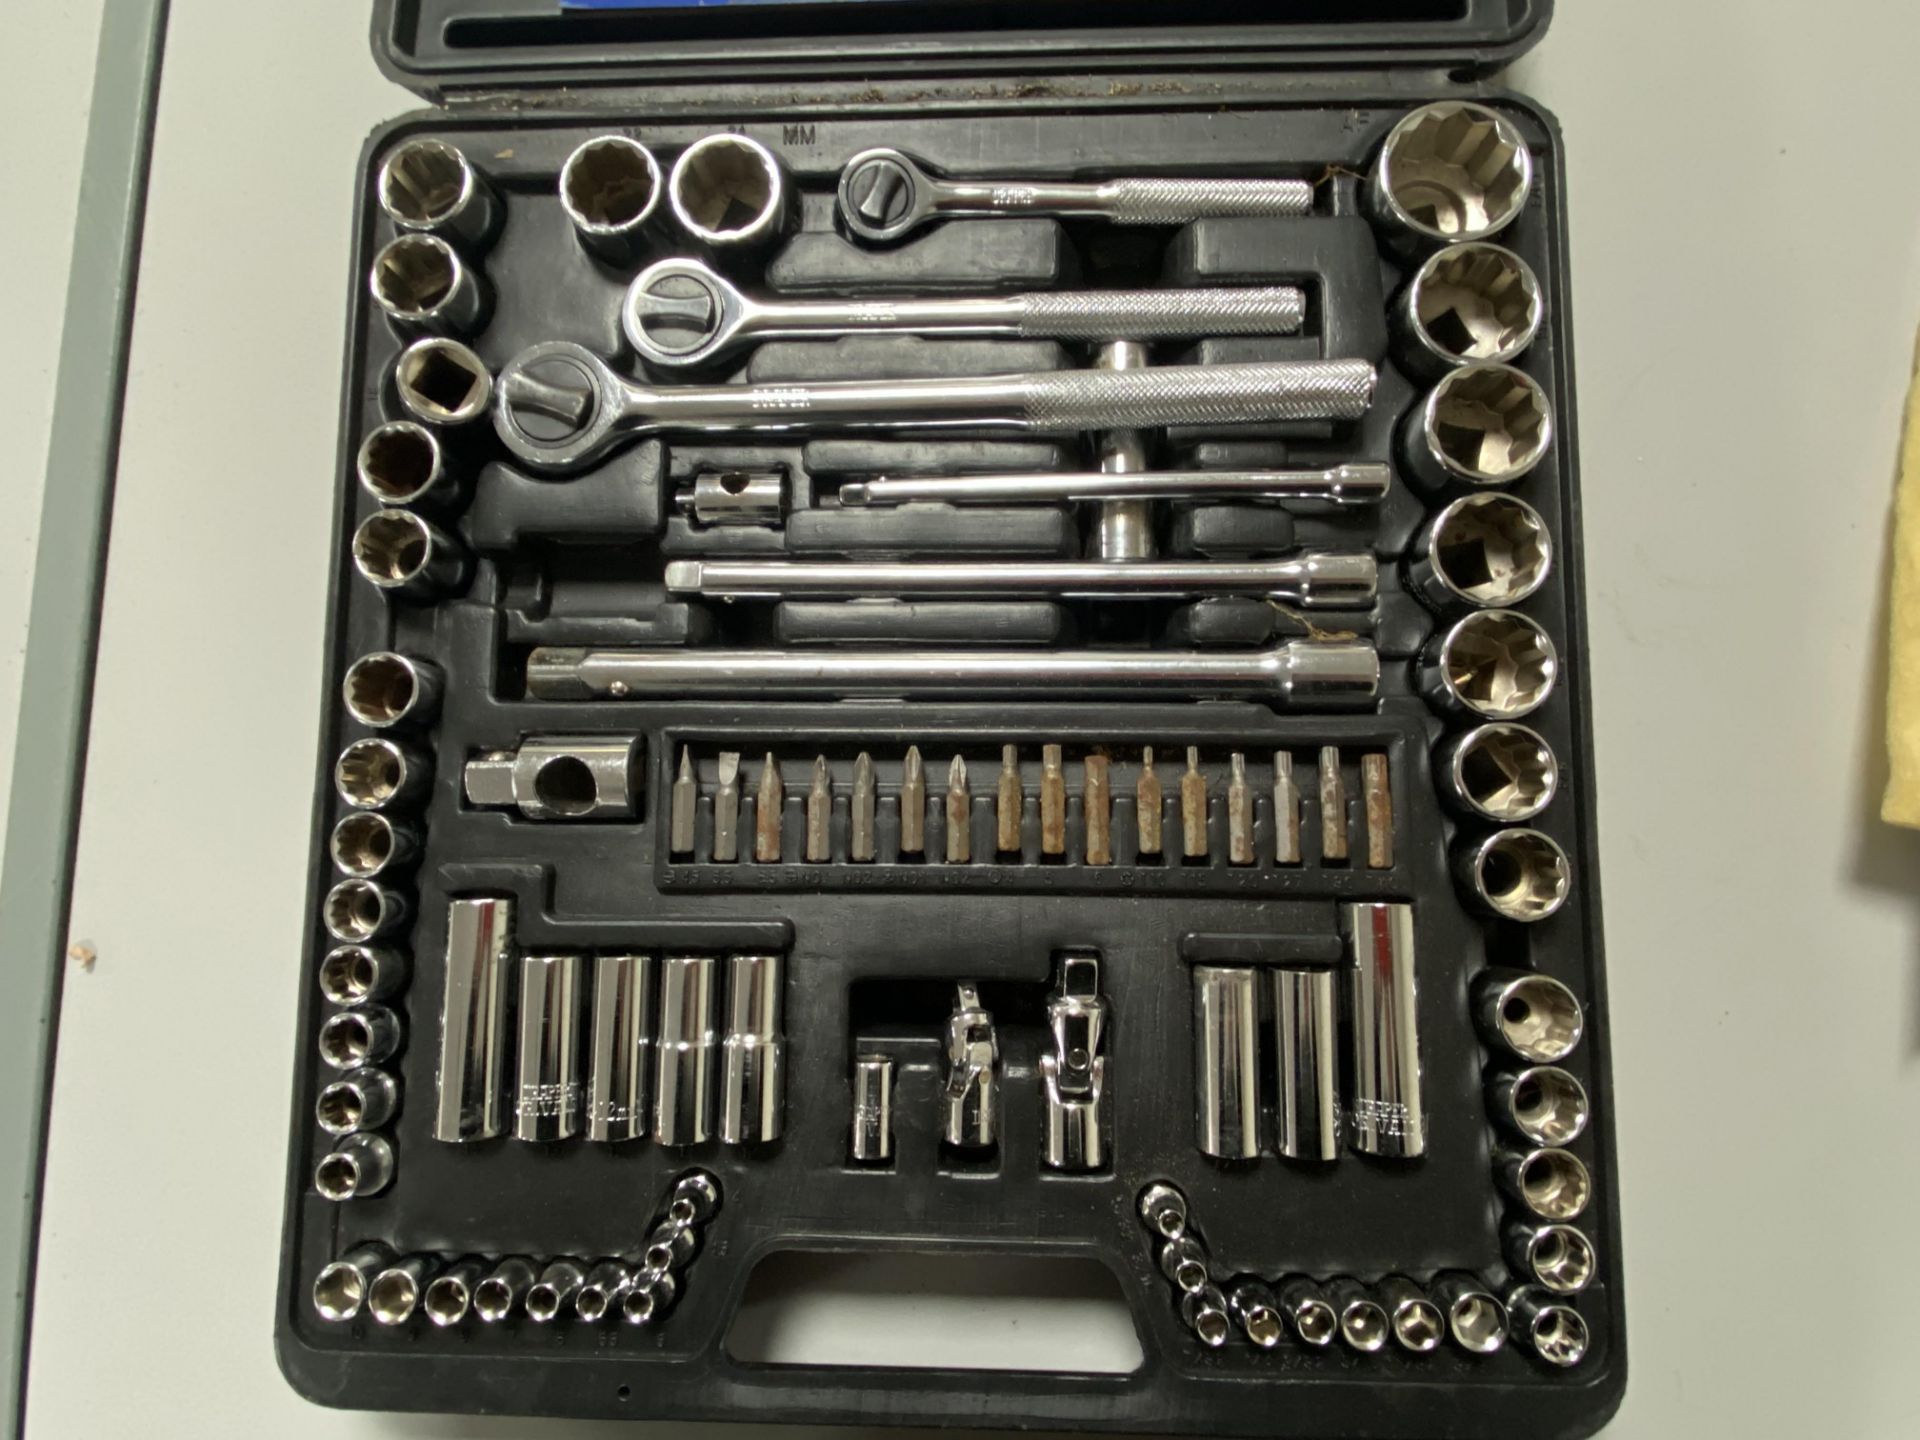 Draper Silverdrive Socket Set with Chrome Vanadium Steel Sockets in Carry Case, Part No. SD80AM - Image 2 of 4